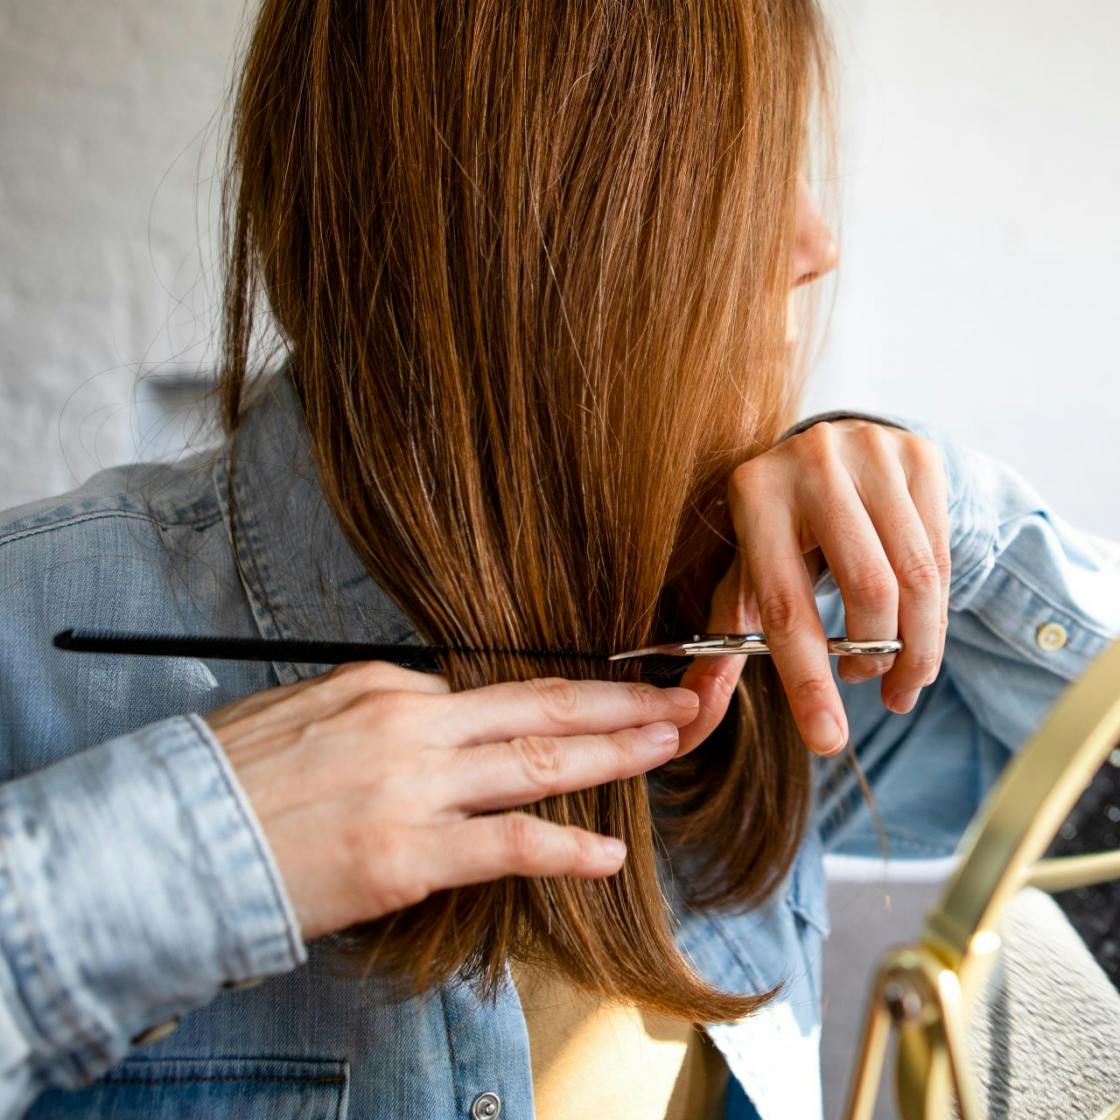 How to cut hair your own hair at home, for all hair lengths